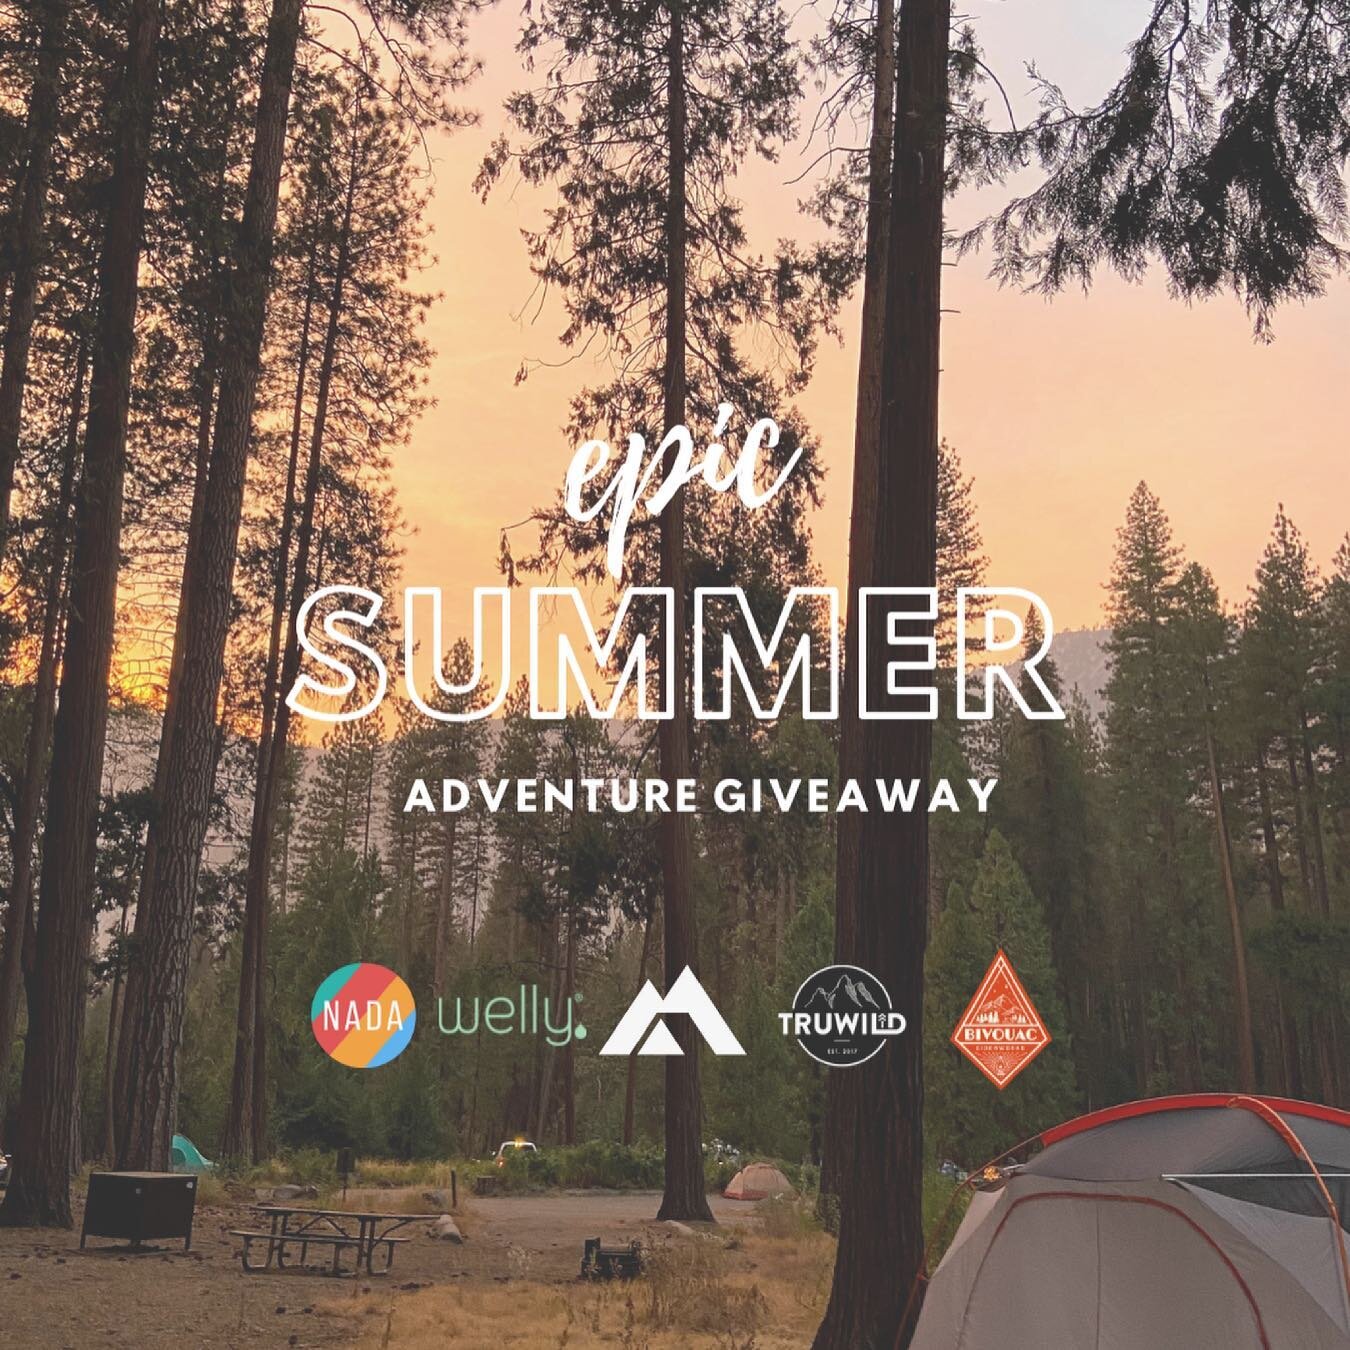 ☀️EPIC SUMMER ADVENTURE GIVEAWAY ⛺️🌵☀️

To celebrate the official start of summer we have teamed up with a few of our favorite sustainable, adventure inclined, nature loving brands to hook up one lucky winner (and three friends) on a truly epic summ